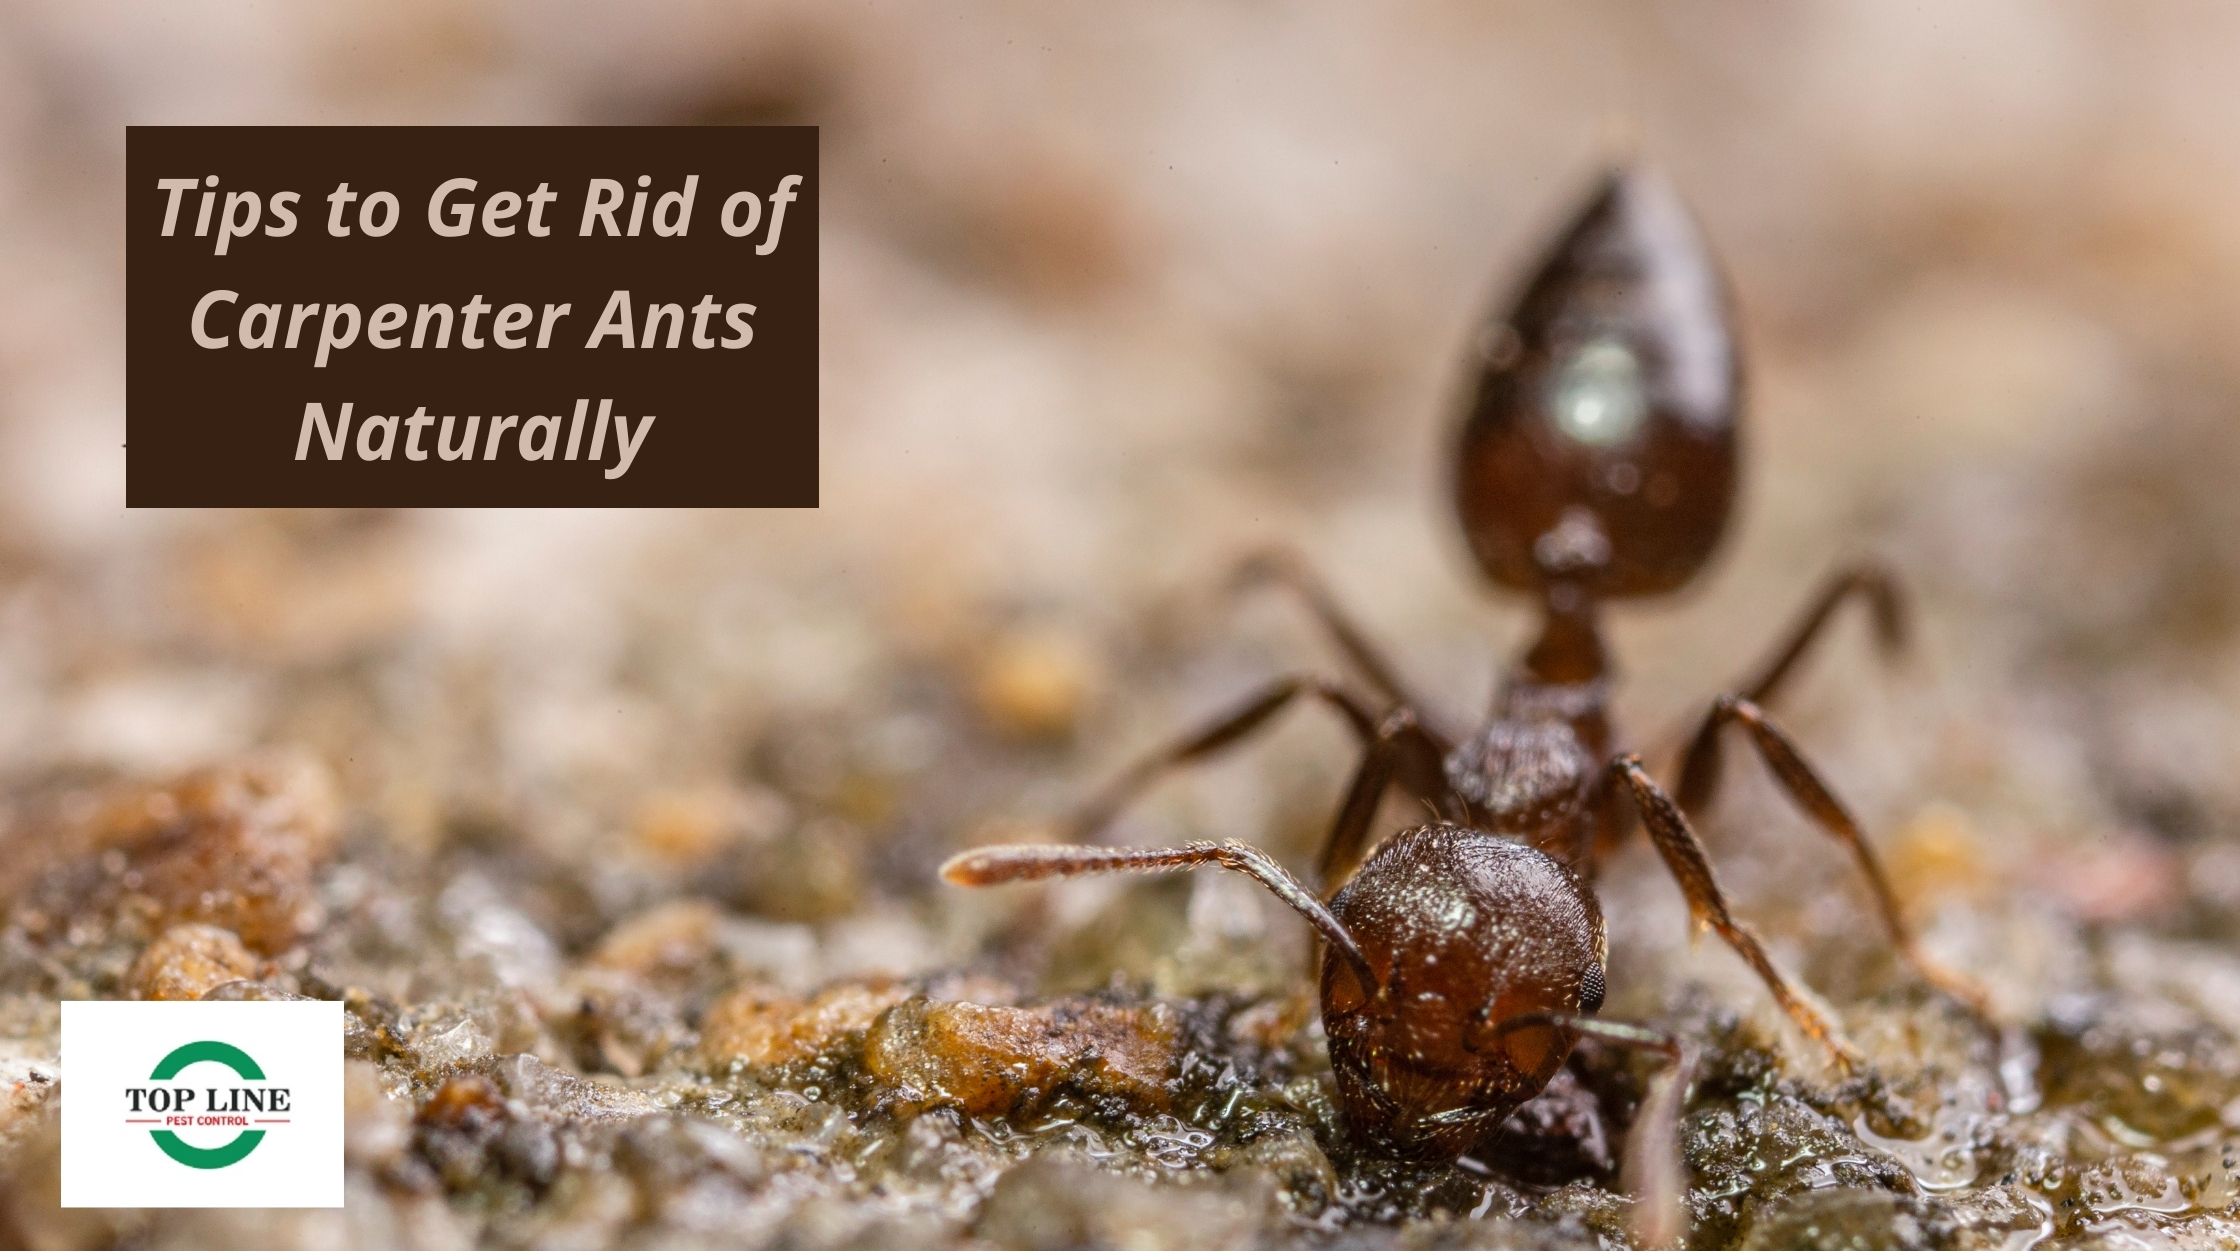 Tips to Get Rid of Carpenter Ants Naturally